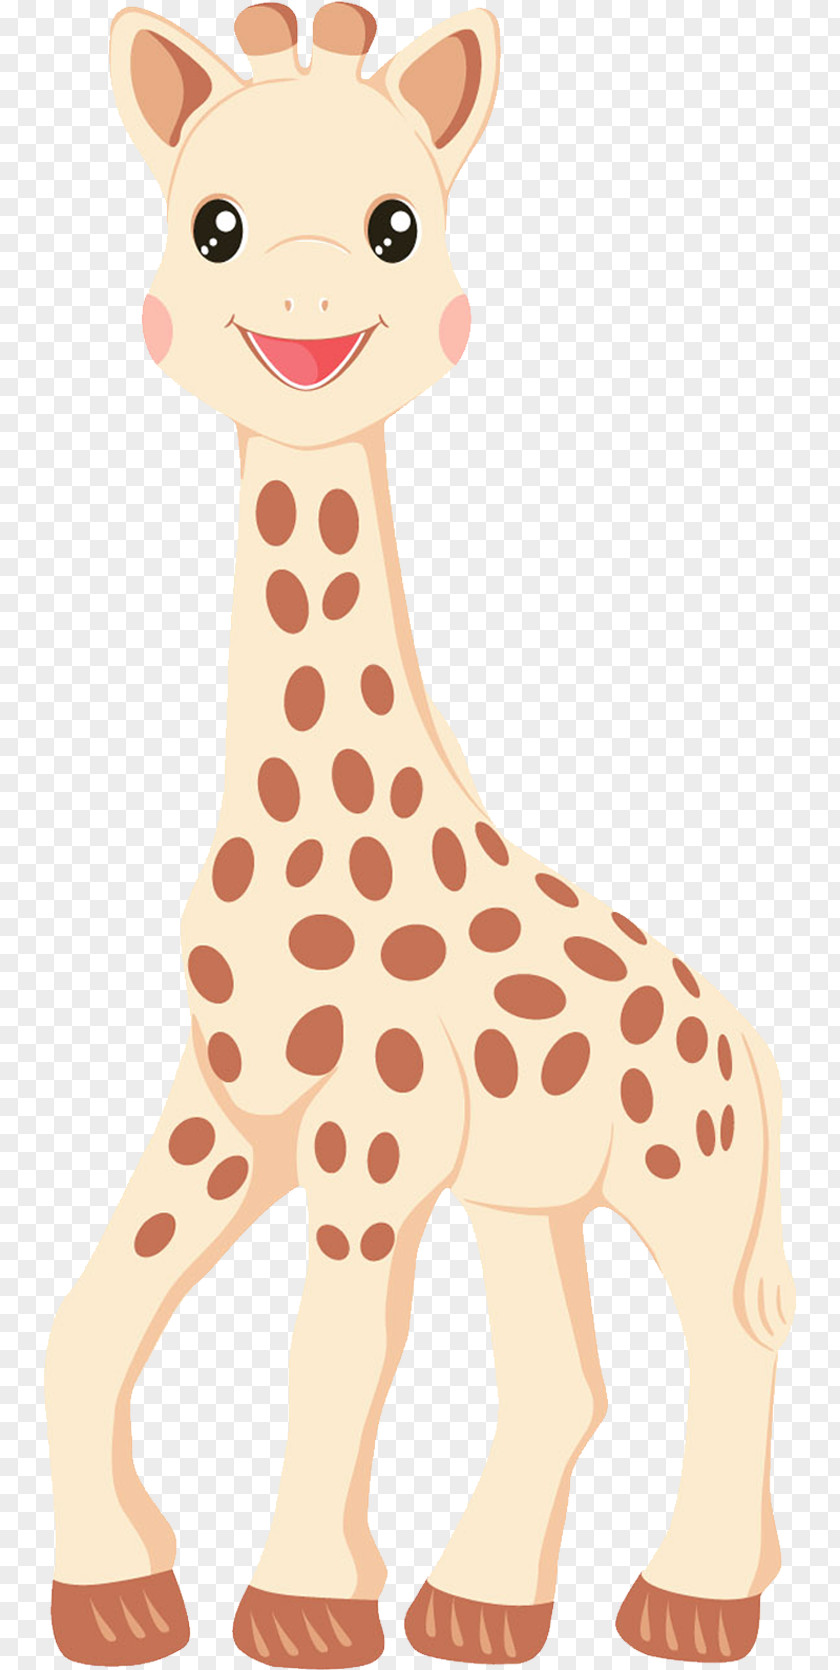 Giraffe Northern Sophie The Let's Get Counting! Infant Teether PNG